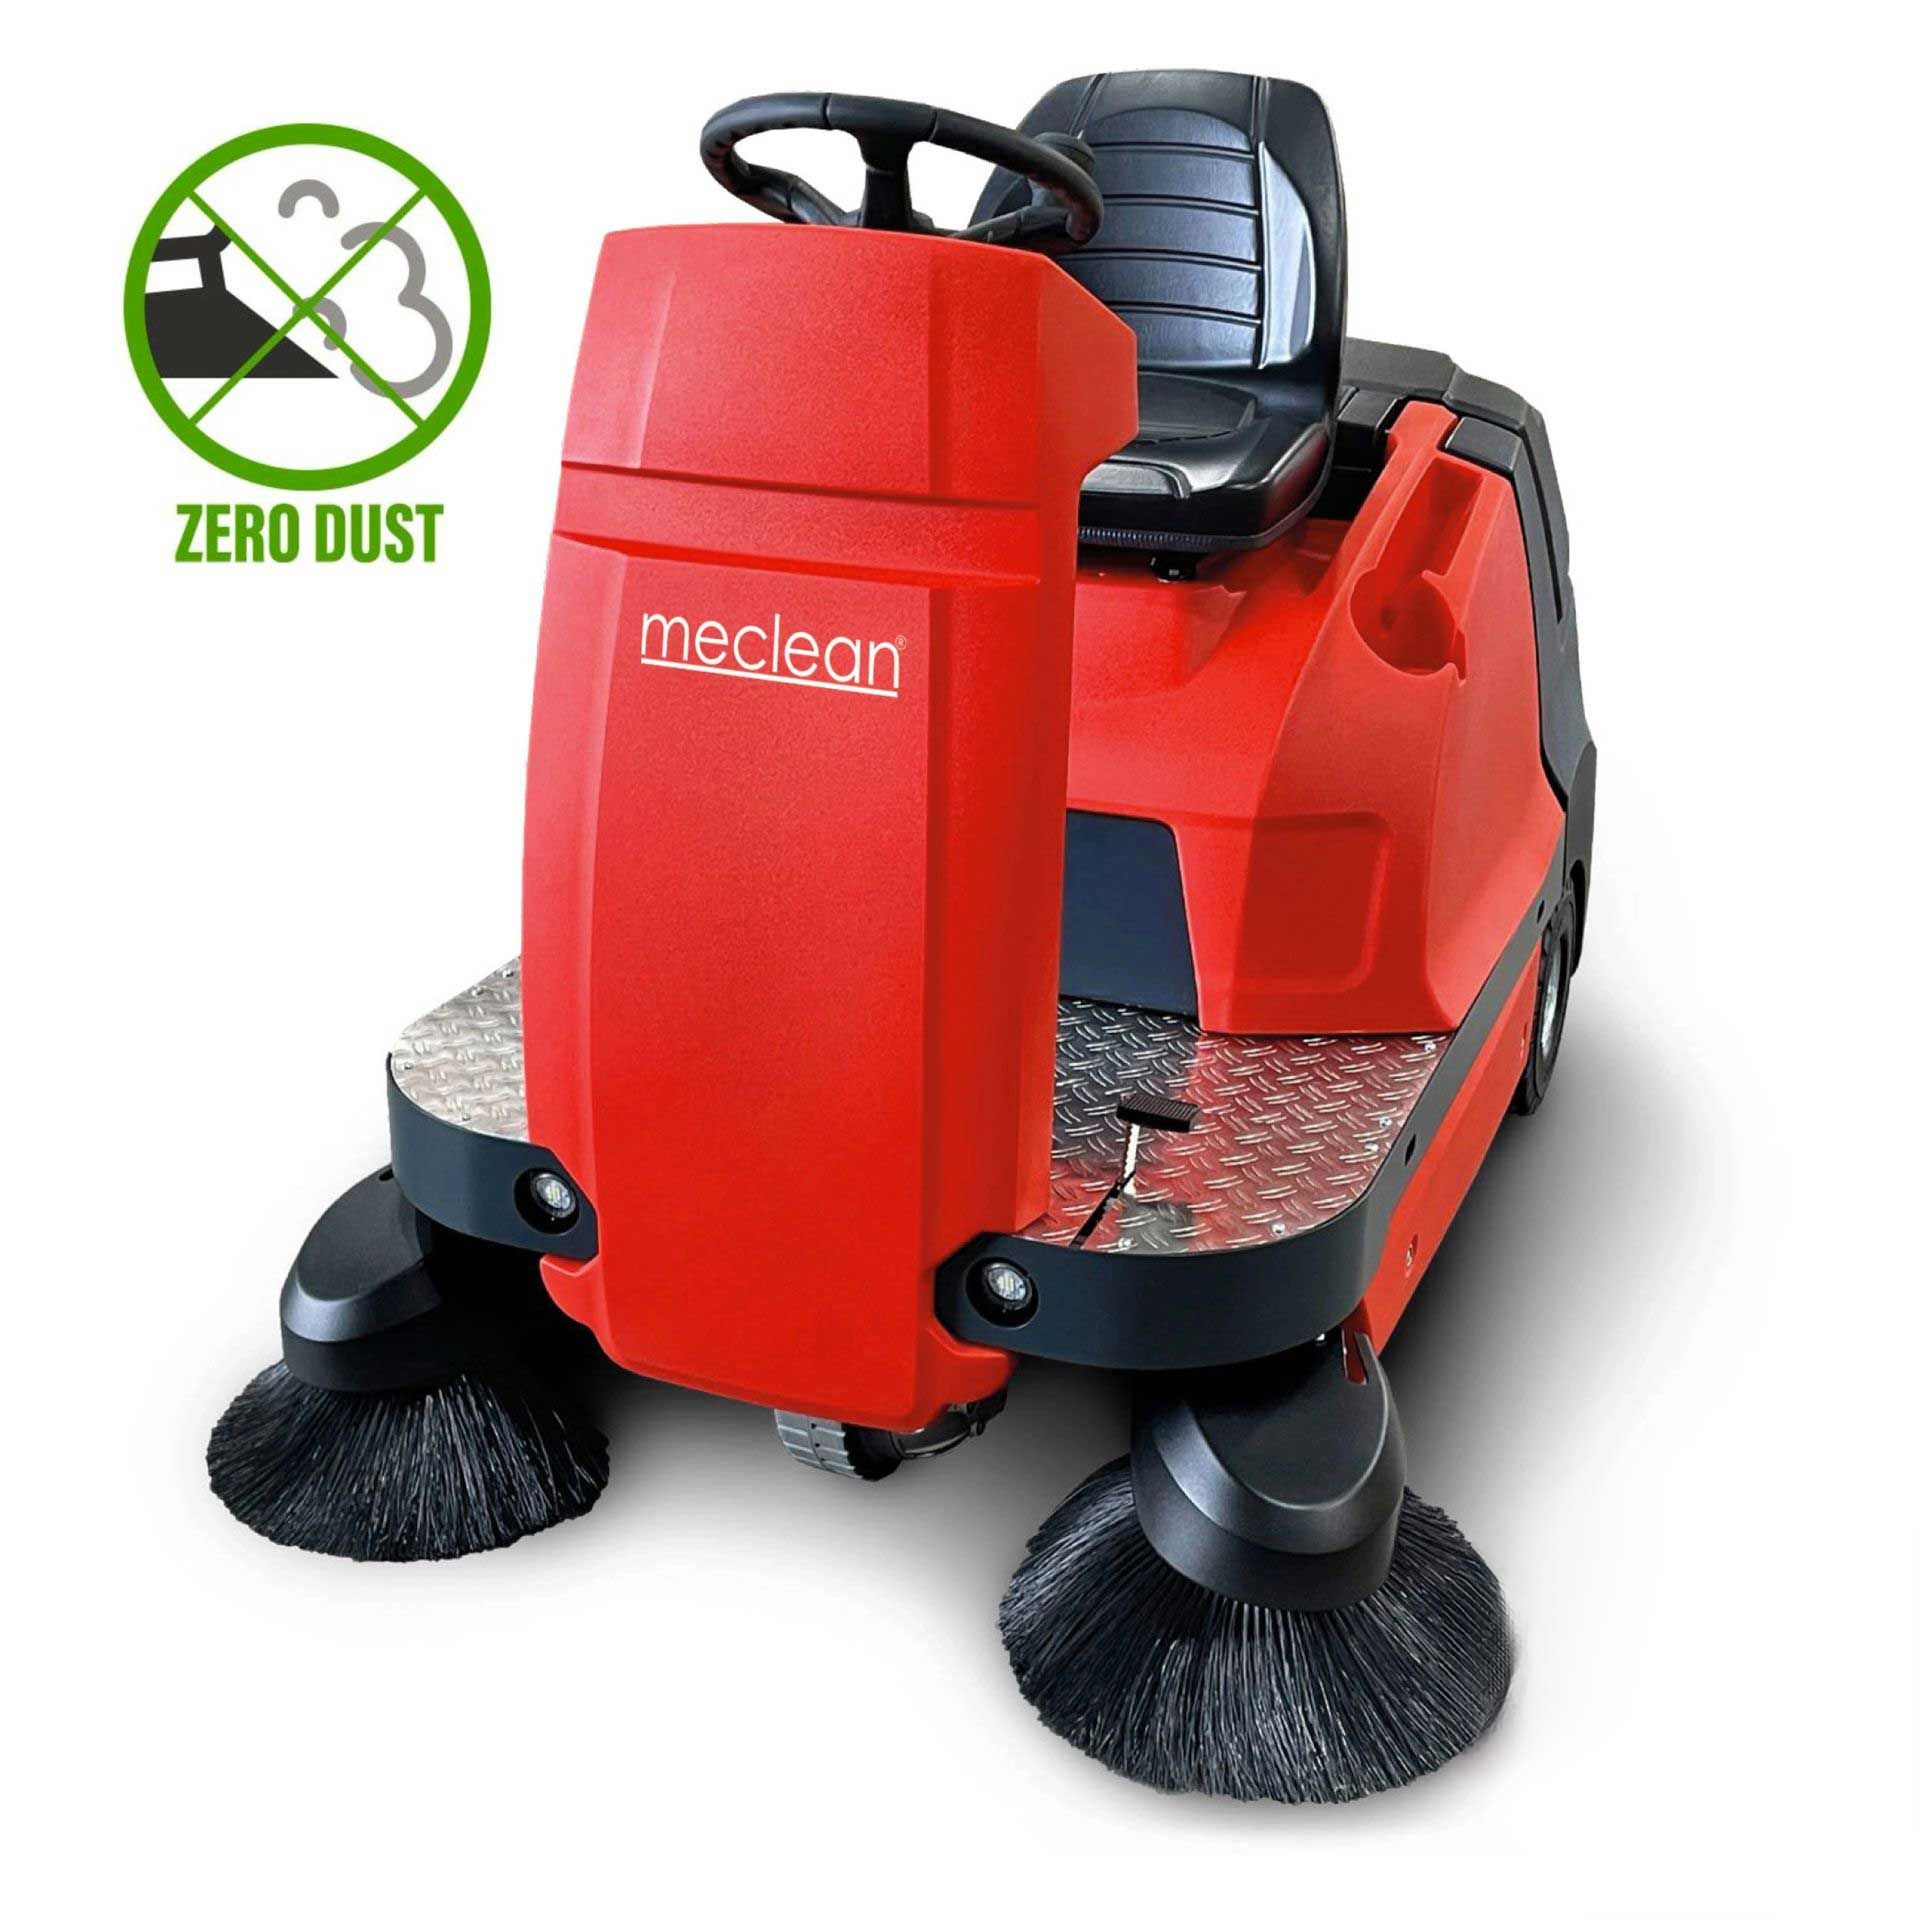 Meclean professional industrial ride-on sweeper battery powered drive BUSTER 1150TTE BASIC